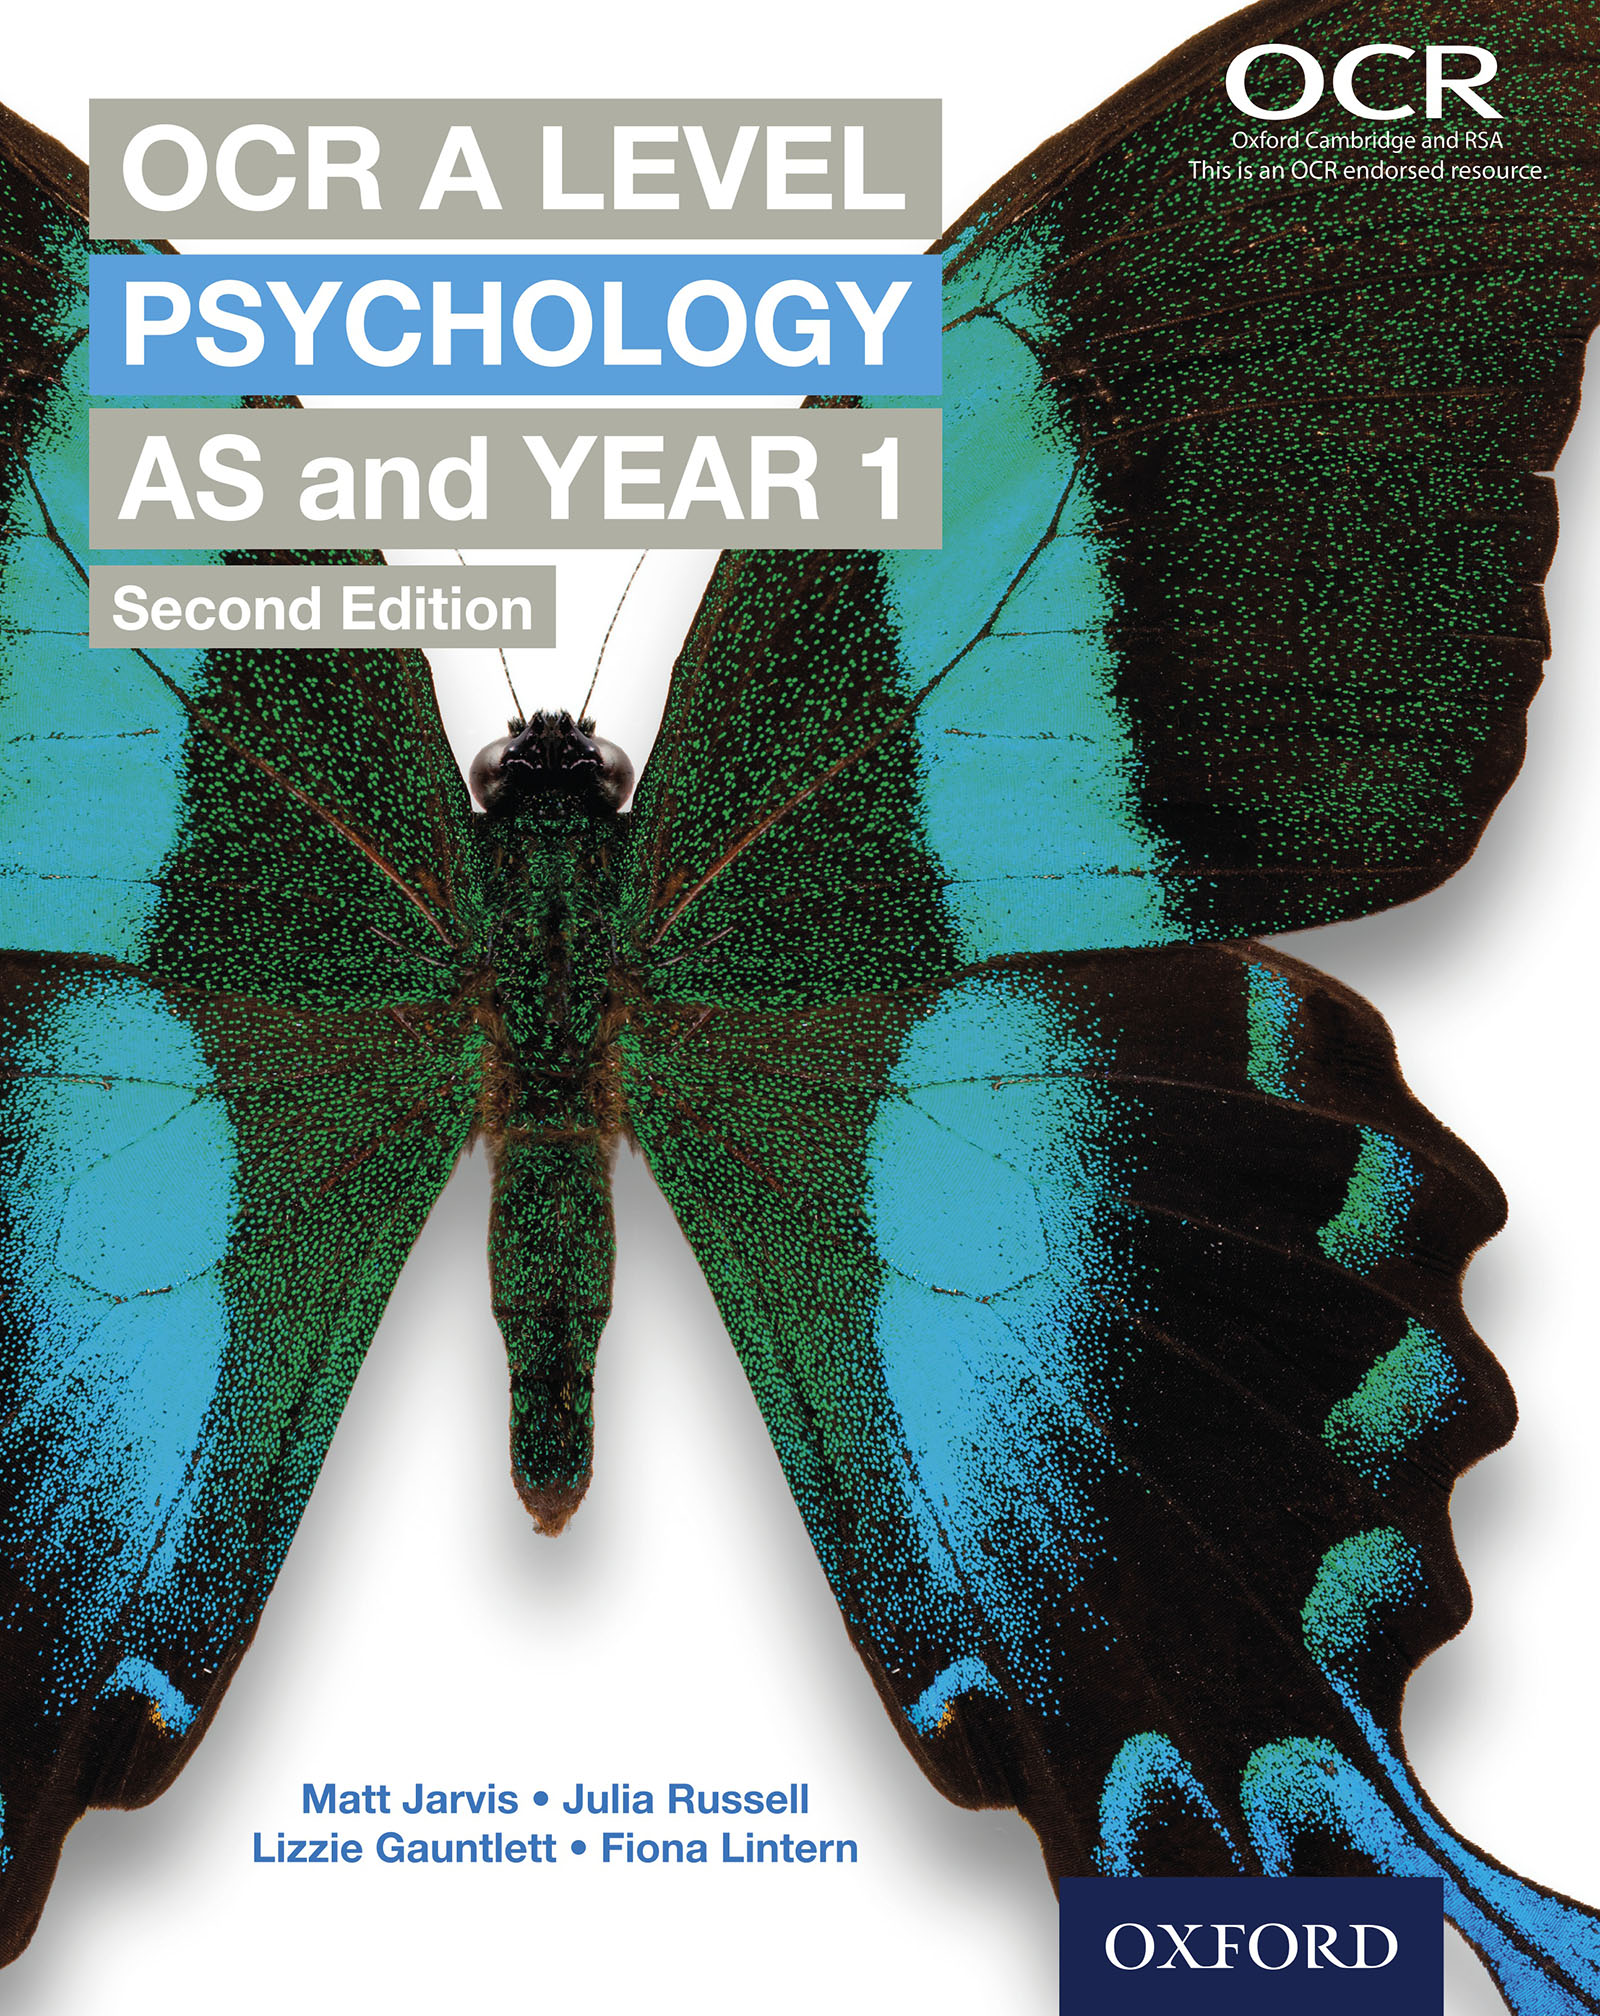 OCR A Level Psychology: AS and Year 0